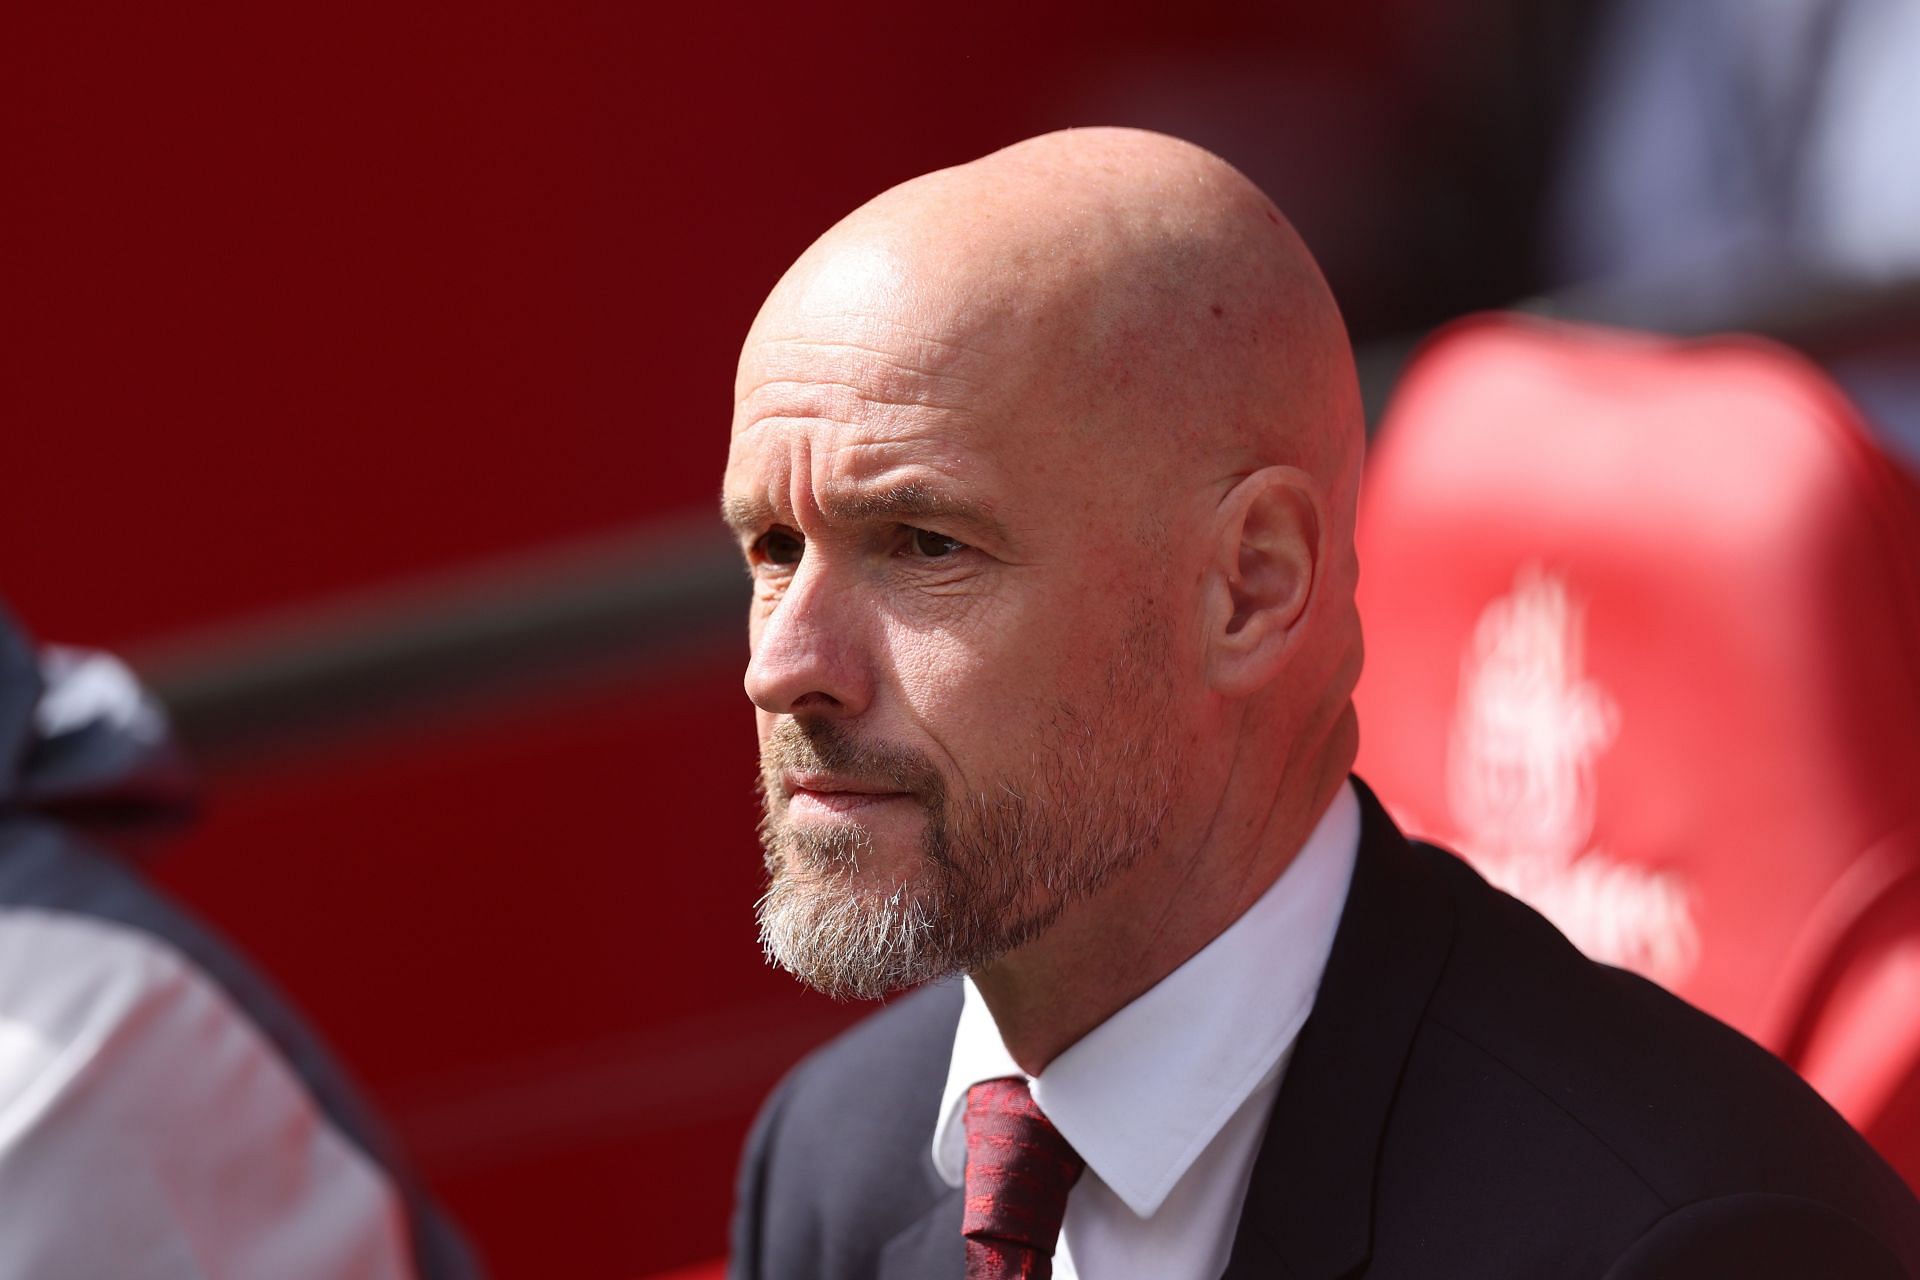 Erik ten Hag makes blunt offside claim as Manchester United suffer 2-1 defeat to Arsenal